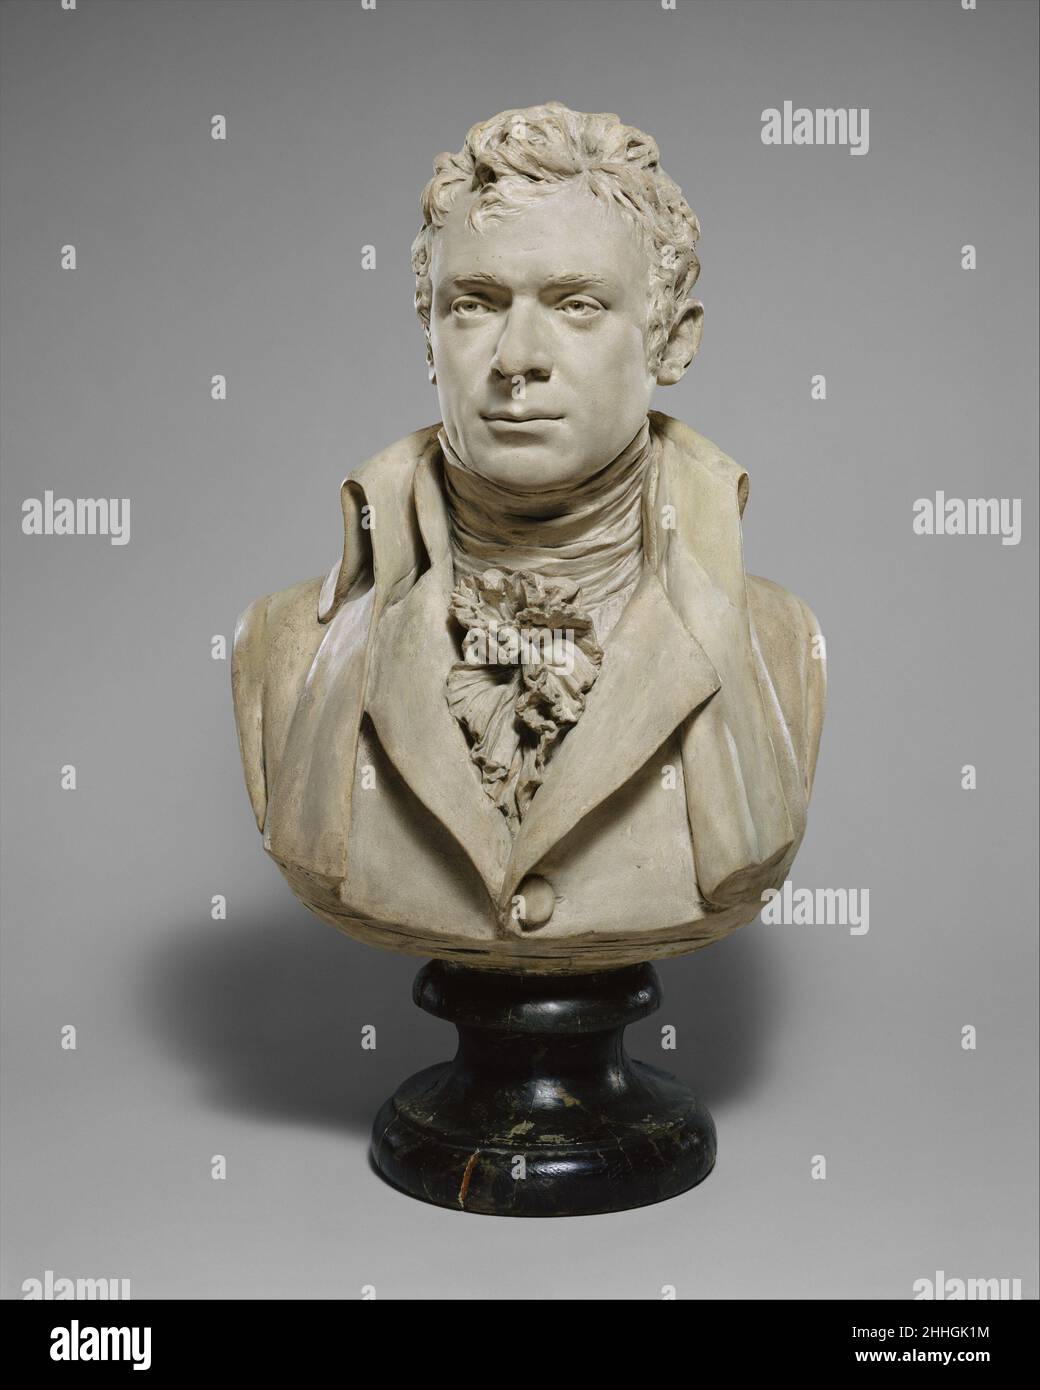 Robert Fulton (1765–1815) 1803–4 Jean Antoine Houdon French This bust depicts one of the last of many Americans to be sculpted by Houdon, the French master portraitist whose earlier images of Washington, Jefferson, and Franklin are embedded in our national consciousness. A painter first and an inventor second, Fulton sat for Houdon while visiting Paris in a fruitless attempt to enlist funding for his submarine invention several years before the ultimately successful Hudson River voyage of his steamship Clermont. The bust appears to have been commissioned by poet and diplomat Joel Barlow, a clo Stock Photo